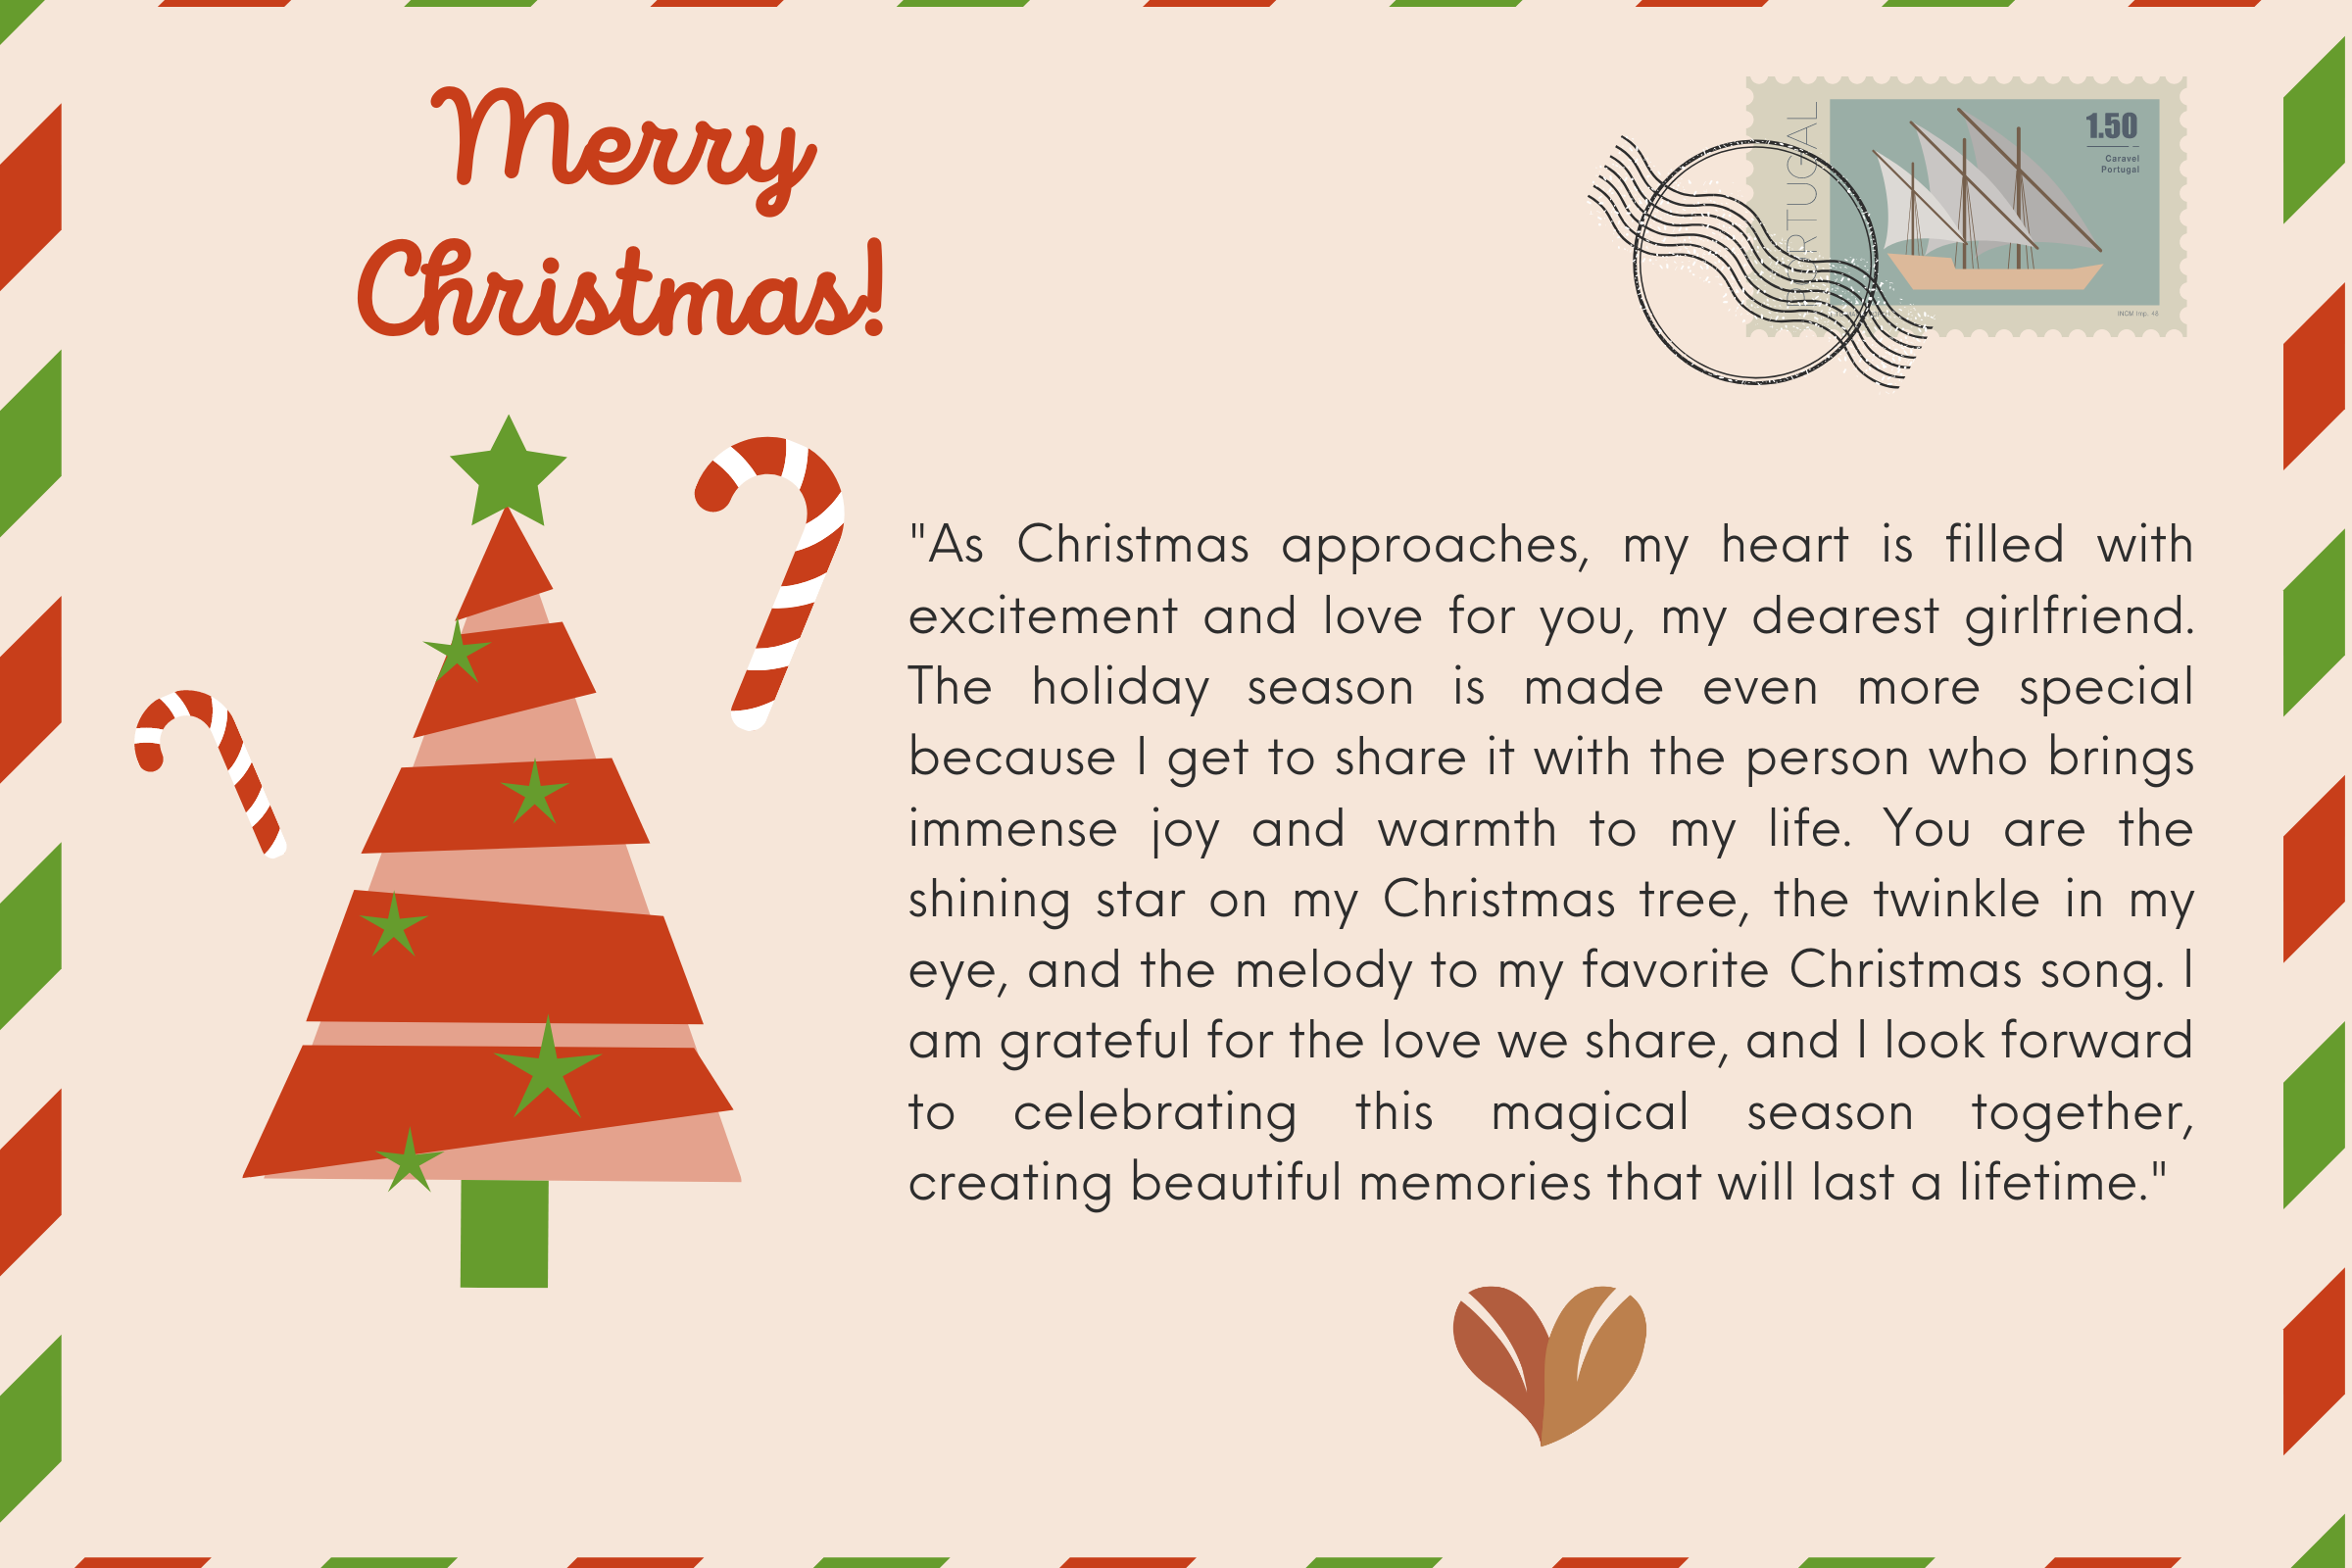 Touching messages you should know for Christmas